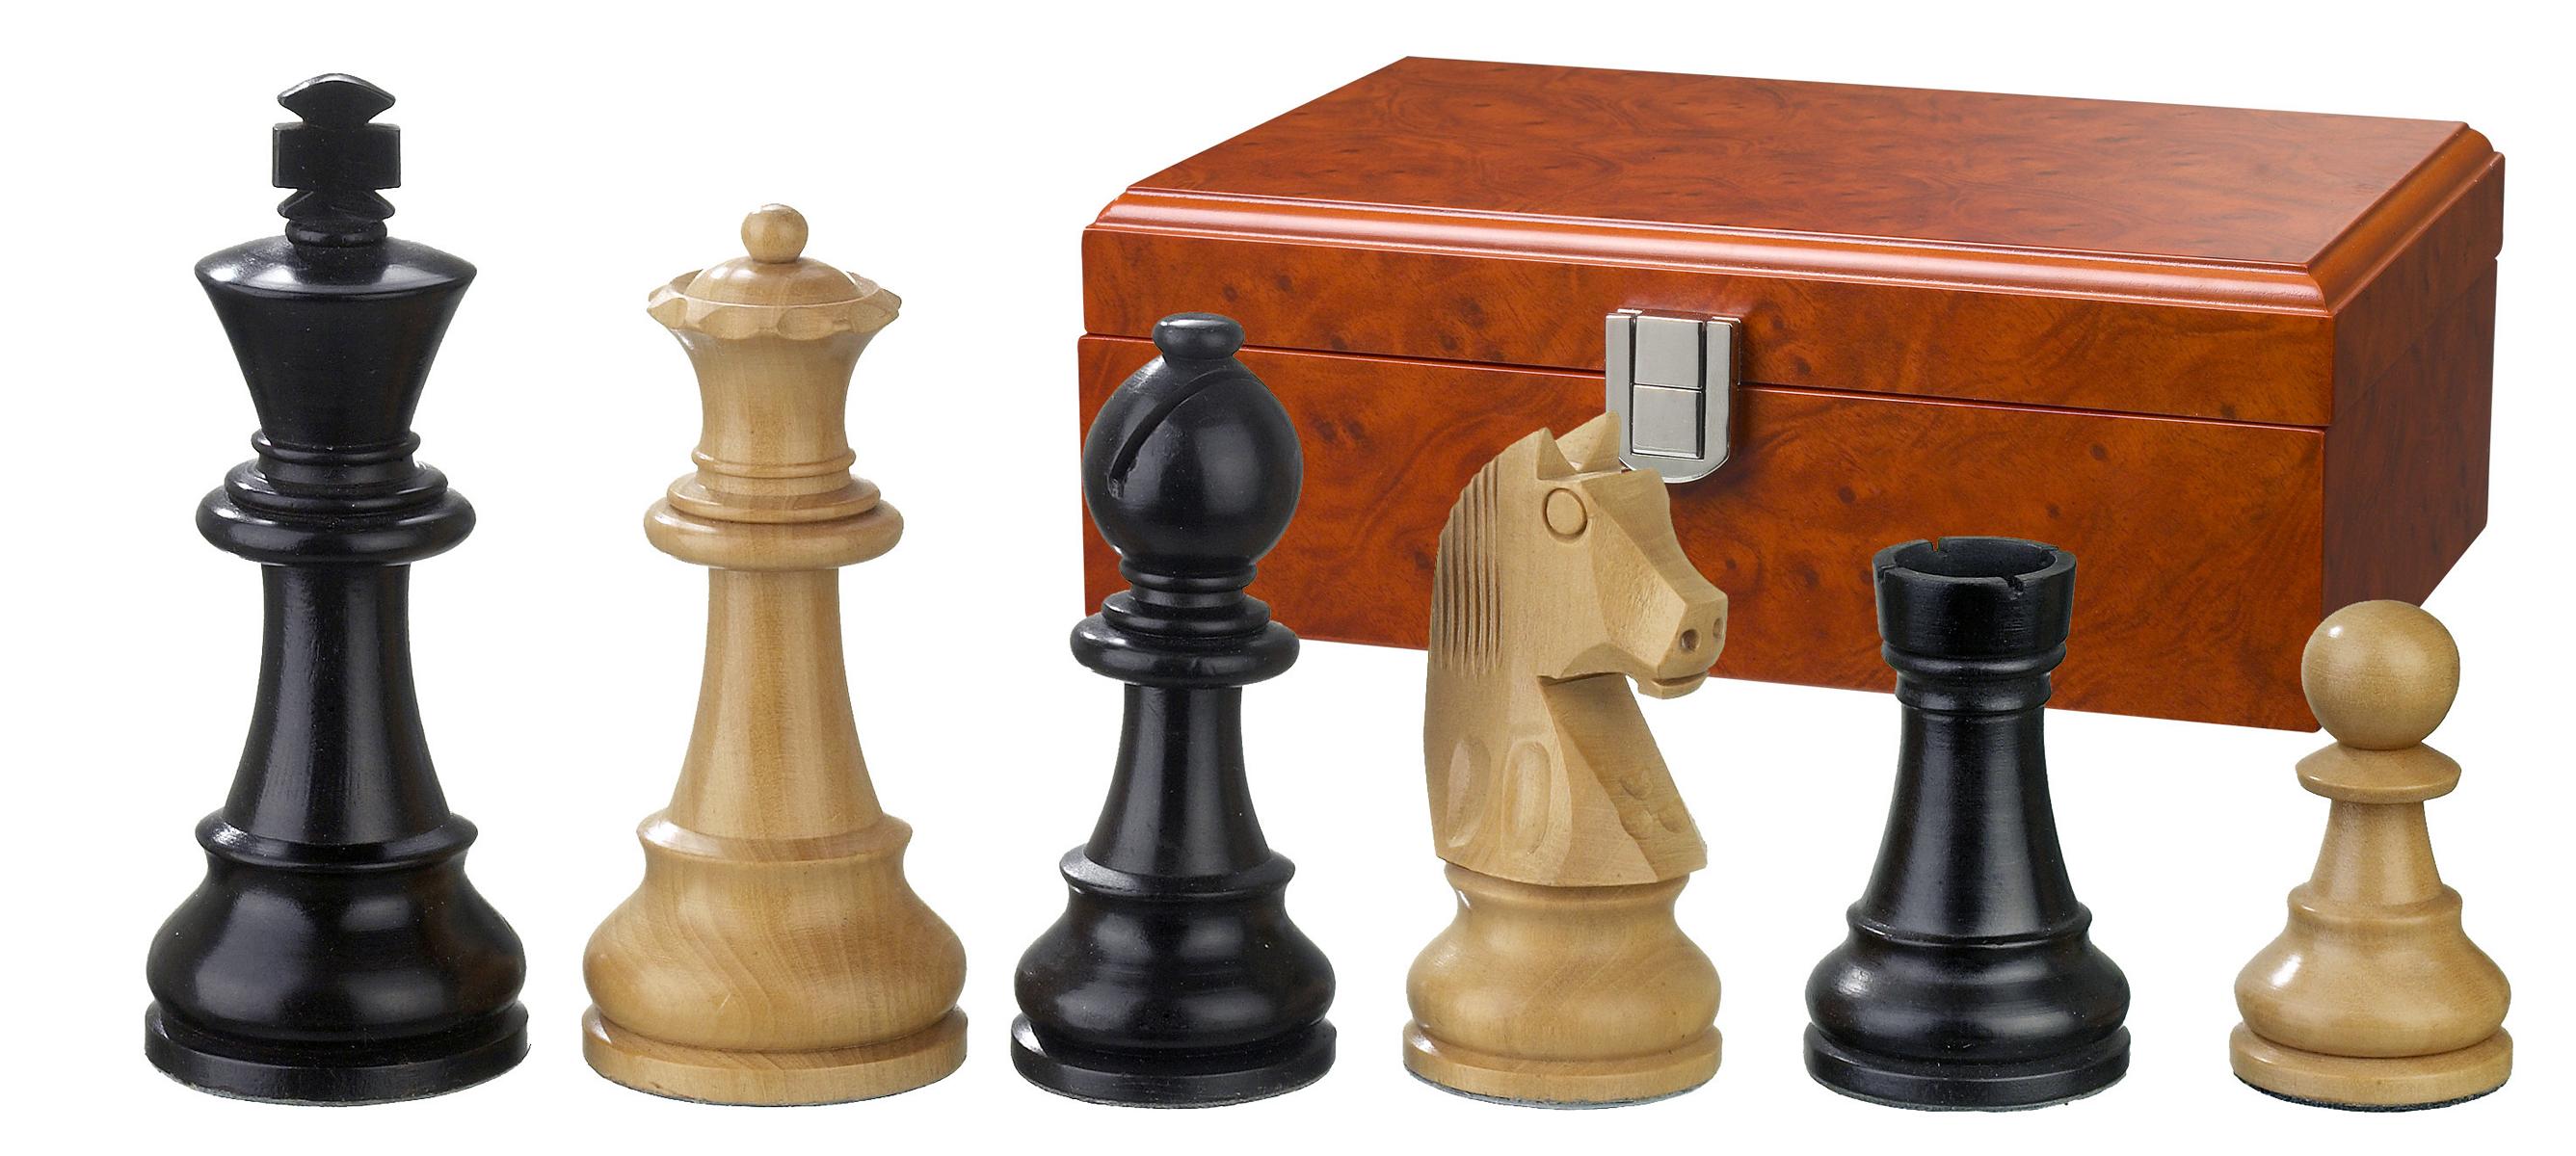 Chess pieces Ludwig XIV, king height 78 mm, in wooden box